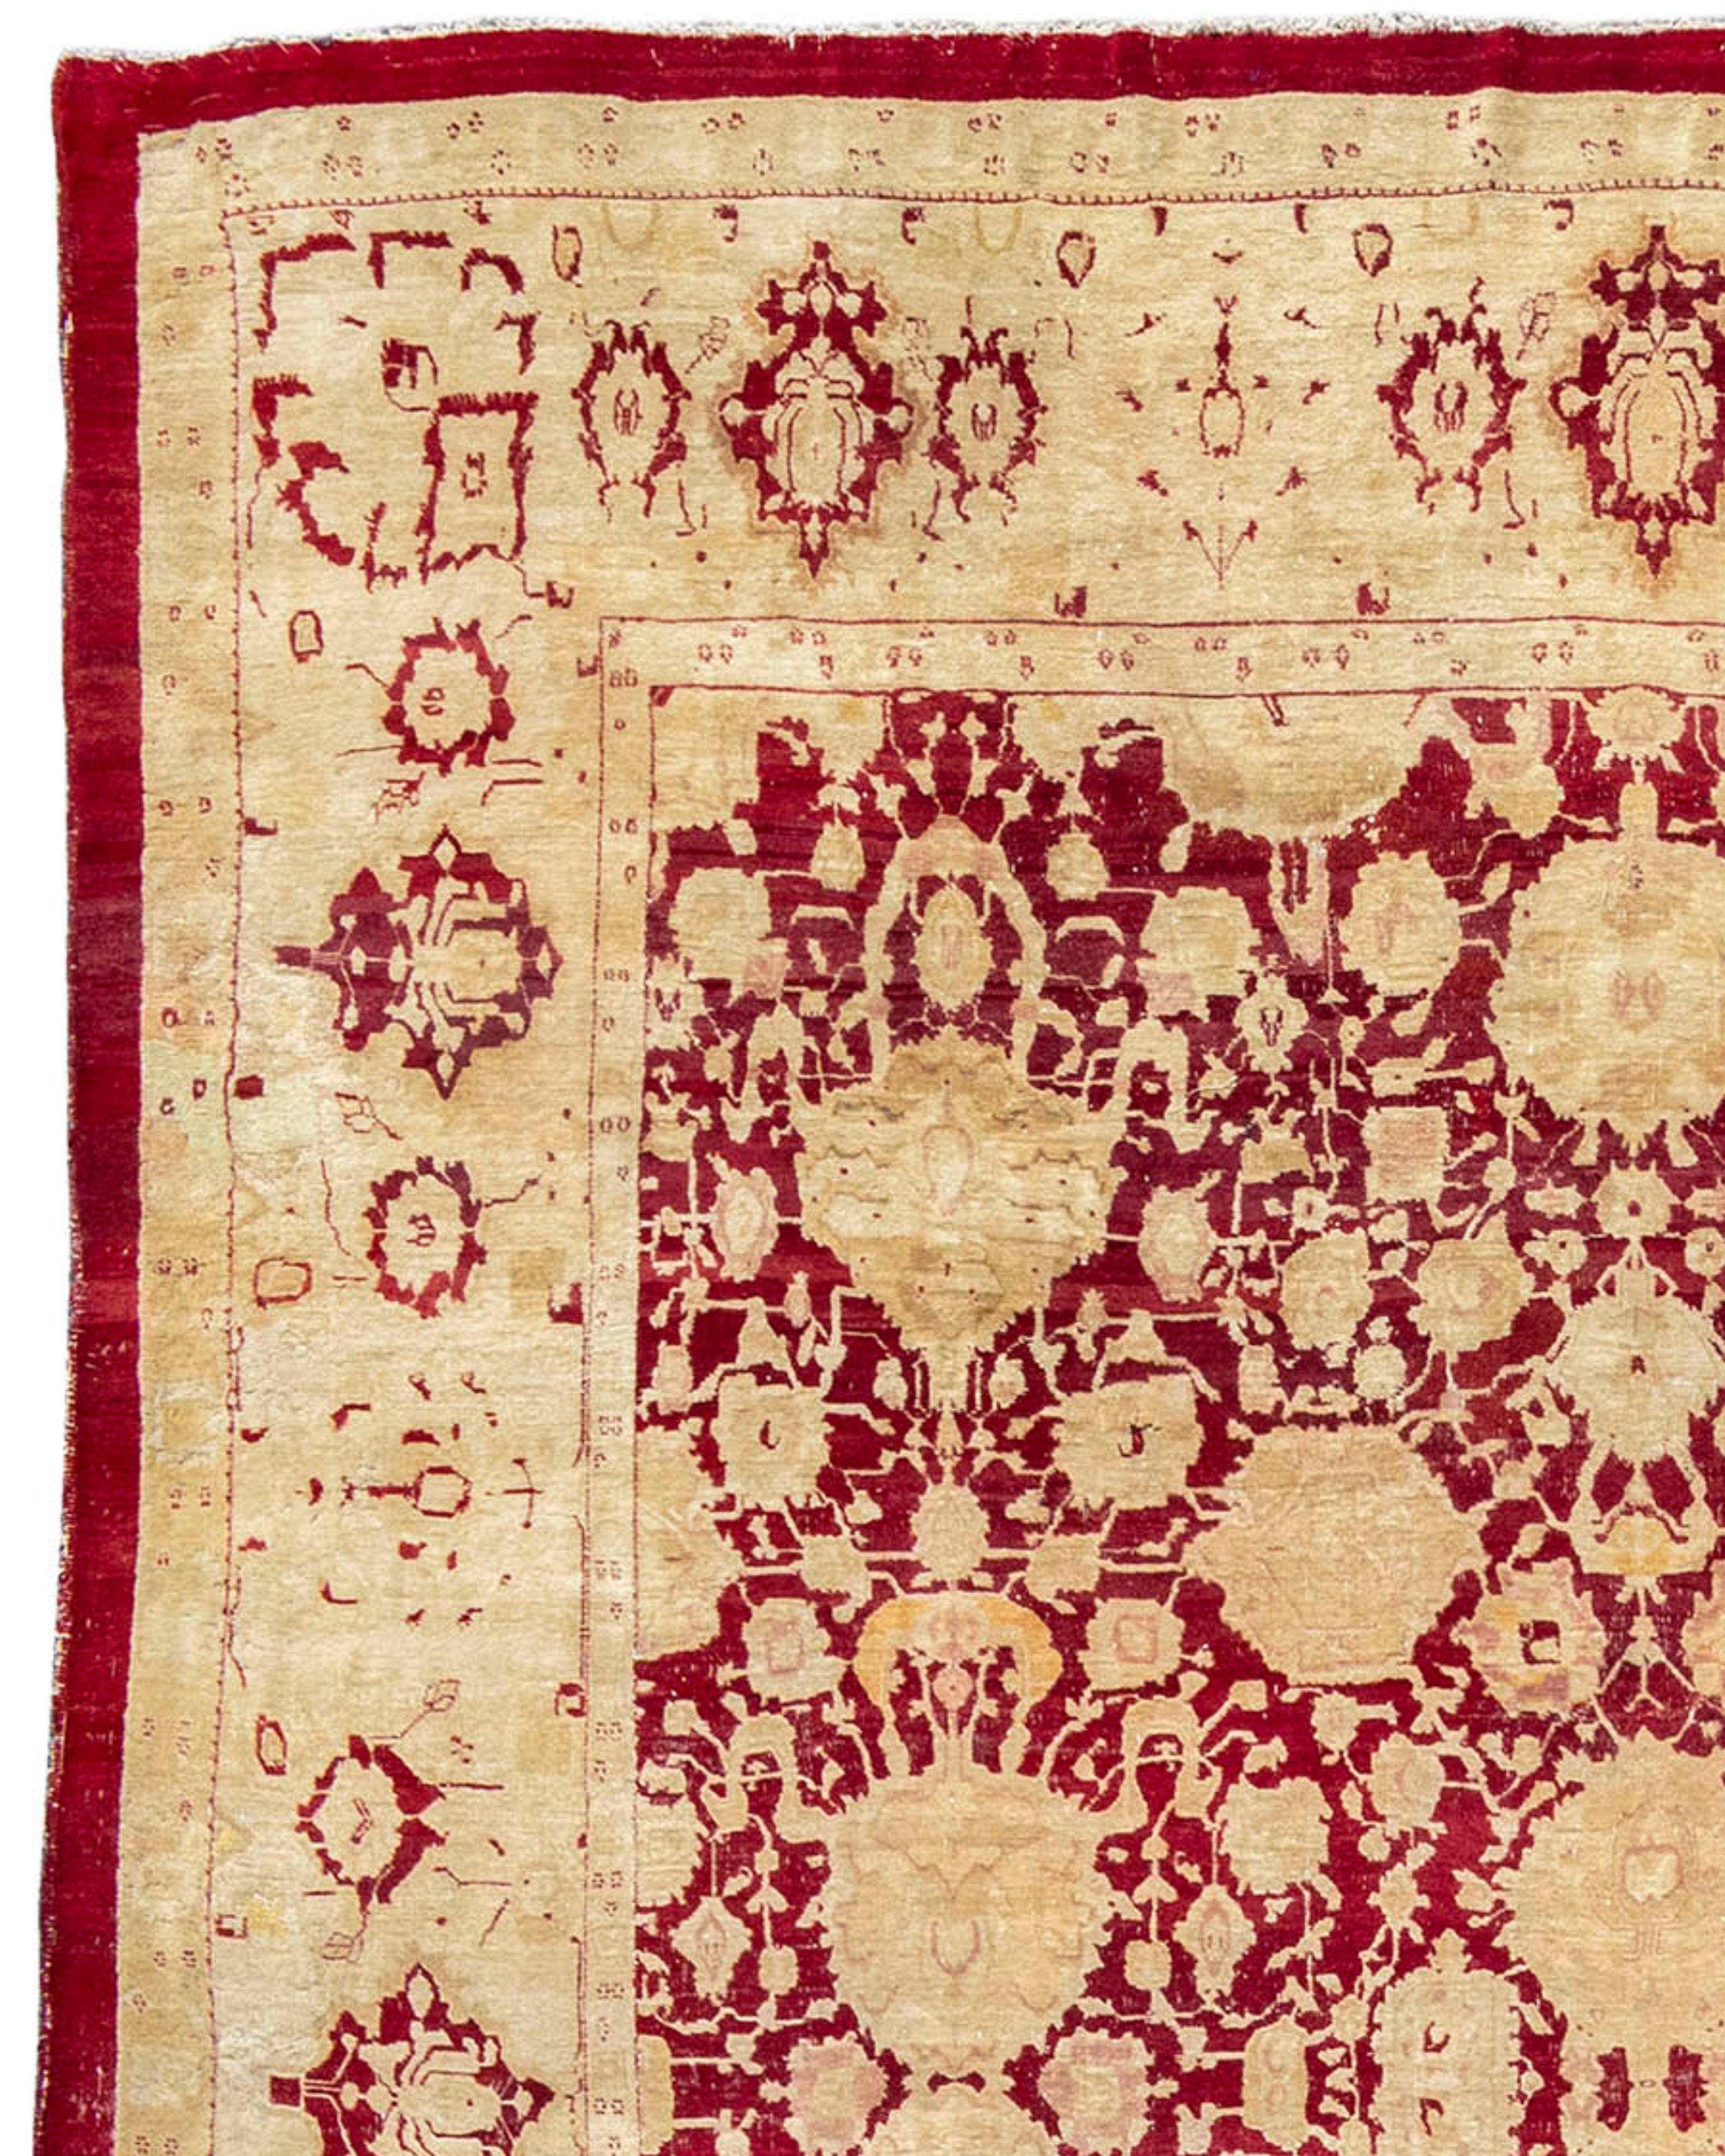 Hand-Woven Antique Large Red and Gold Agra Carpet, Late 19th Century For Sale